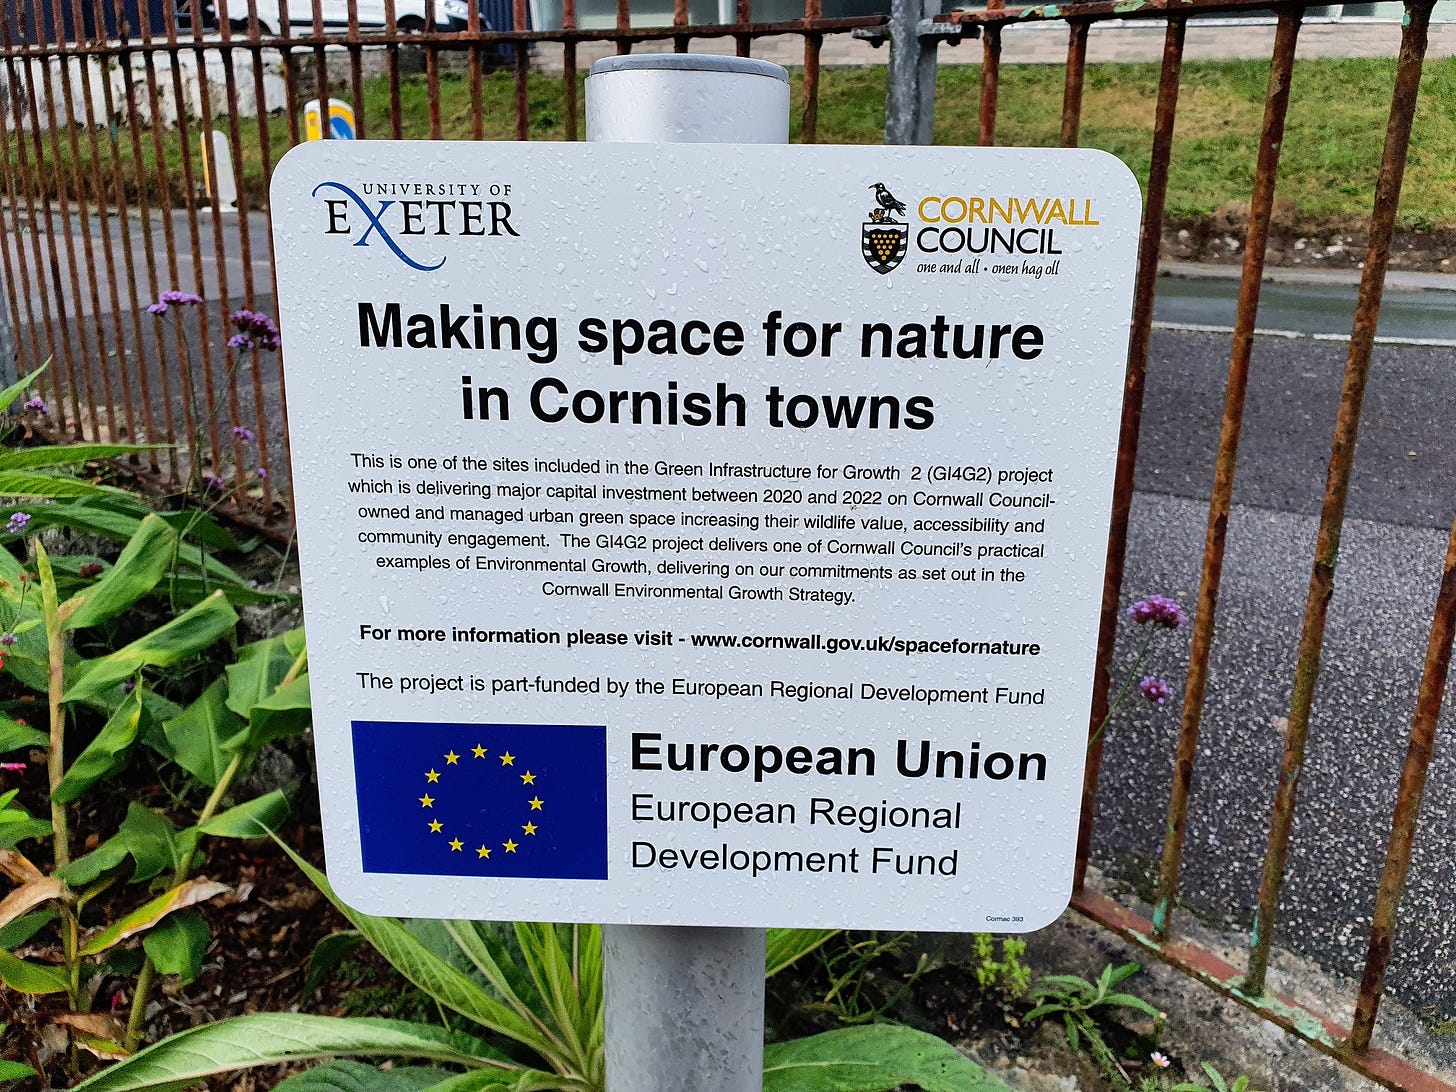 Plaque bearing the logos of Exeter University and Cornwall Council, with text reading "Making space for nature in Cornish towns: This is one of the sites included in the Green Infrastructure for Growth (GI4G2) project which is delivering major capital investment between 2020 and 2022 on Cornwall Council-owned and managed urban green space increasing their wildlife value, accessibility and community engagement. The GI4G2 project delivers one of Cornwall Council’s practical examples of Environmental Growth, delivering on our commitments as set out in the Cornwall Environmental Growth Strategy." An EU logo is accompanied by text reading: "The project is part-funded by the European Regional Development Fund."